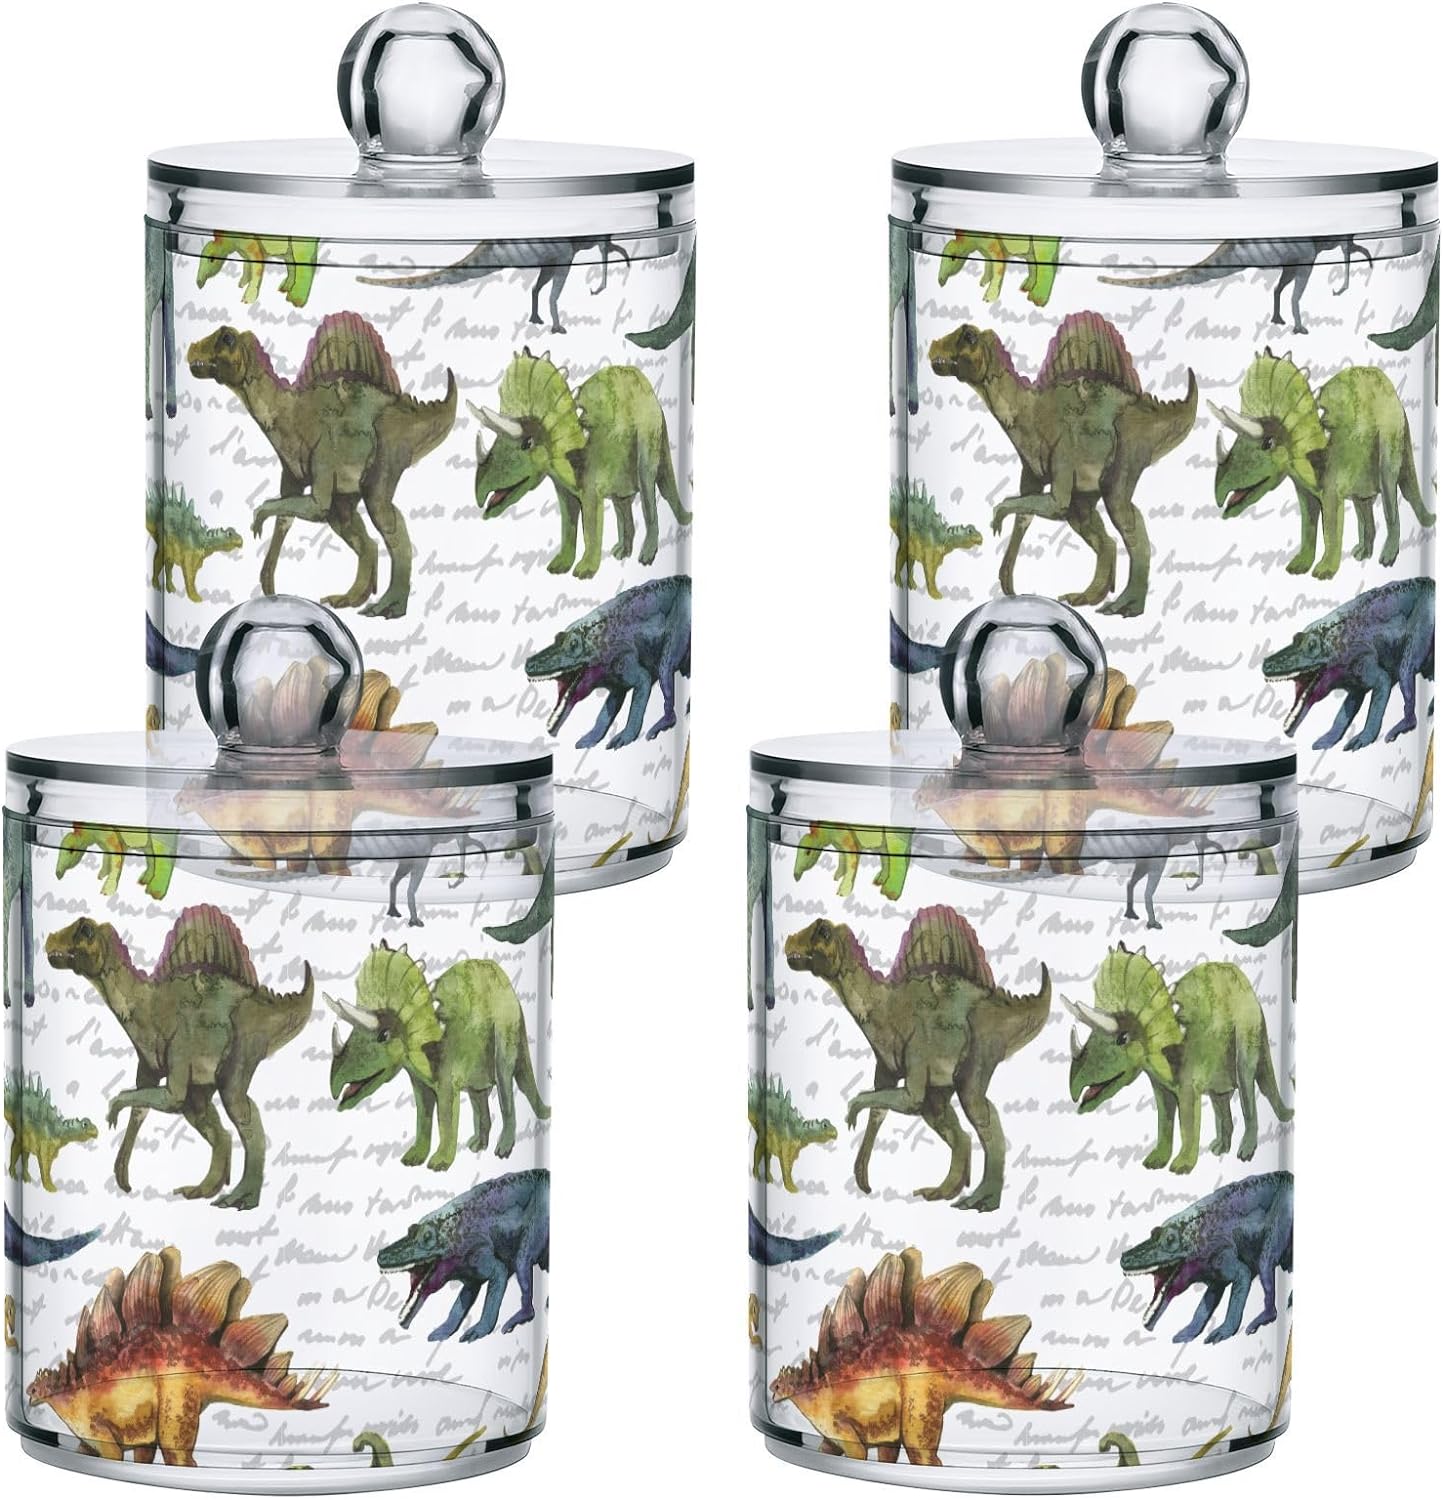 White Dinosaurs Qtip Holder Dispenser Vintage Dino Bathroom Canister Storage Organization 4 Pack Clear Plastic Apothecary Jars with Lids Vanity Makeup Organizer For Cotton Swab Ball Floss